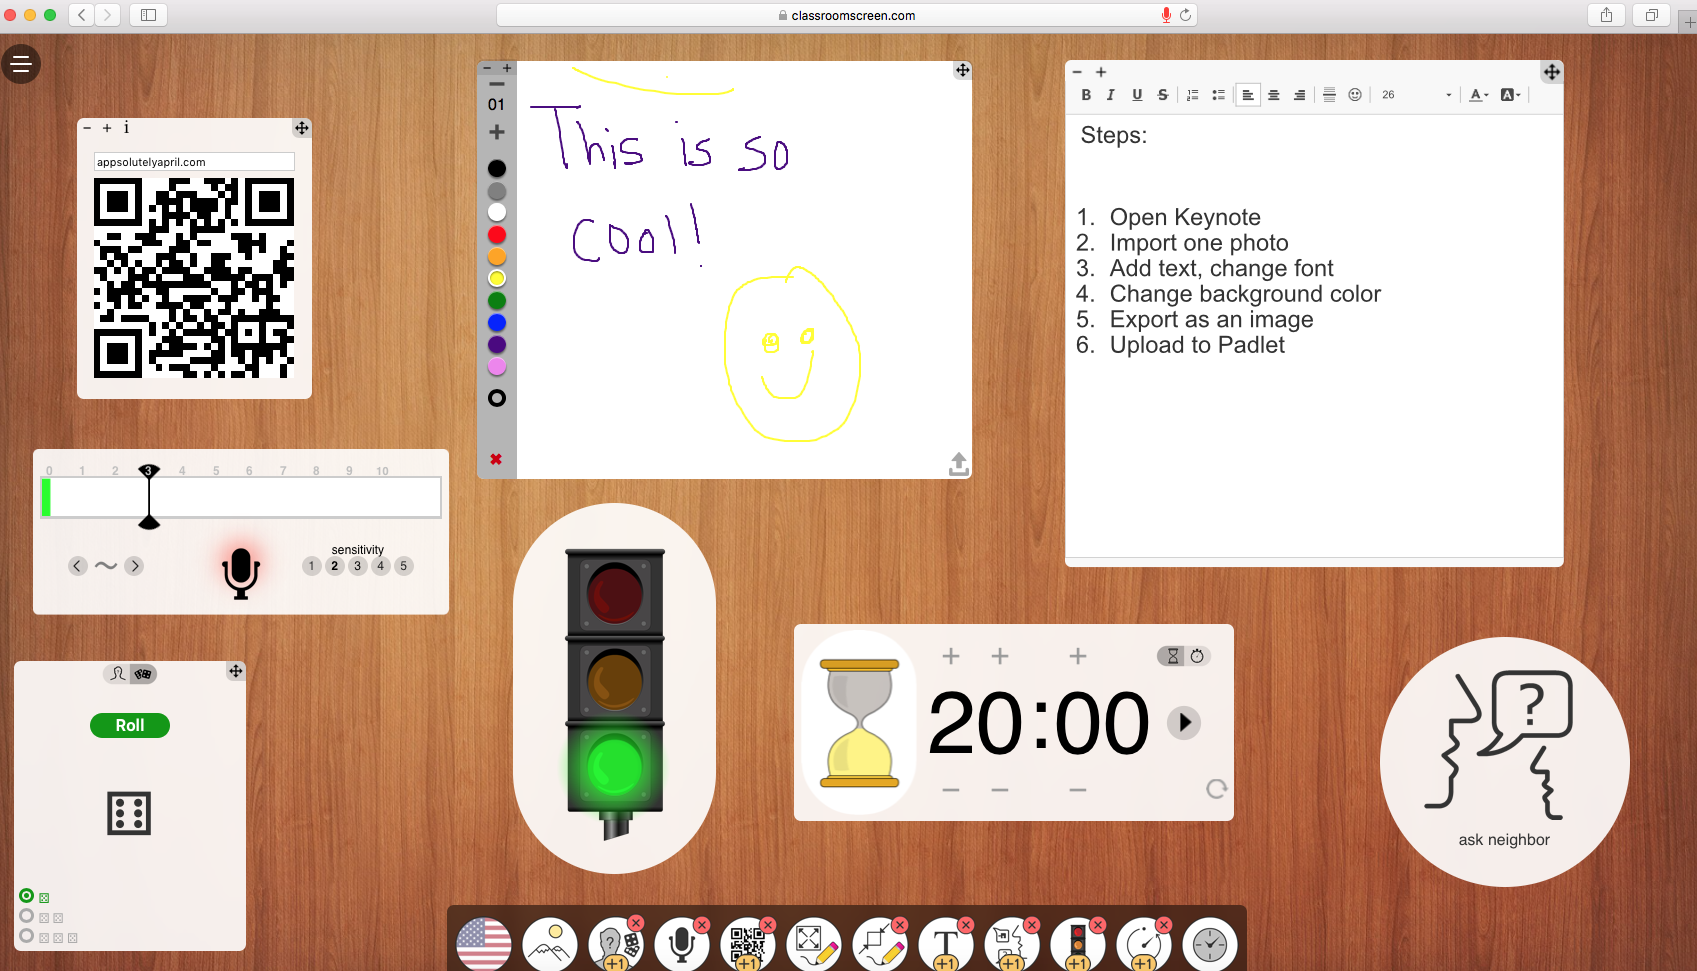 Classroomscreen.com: A Web Tool Teachers and Students will LOVE